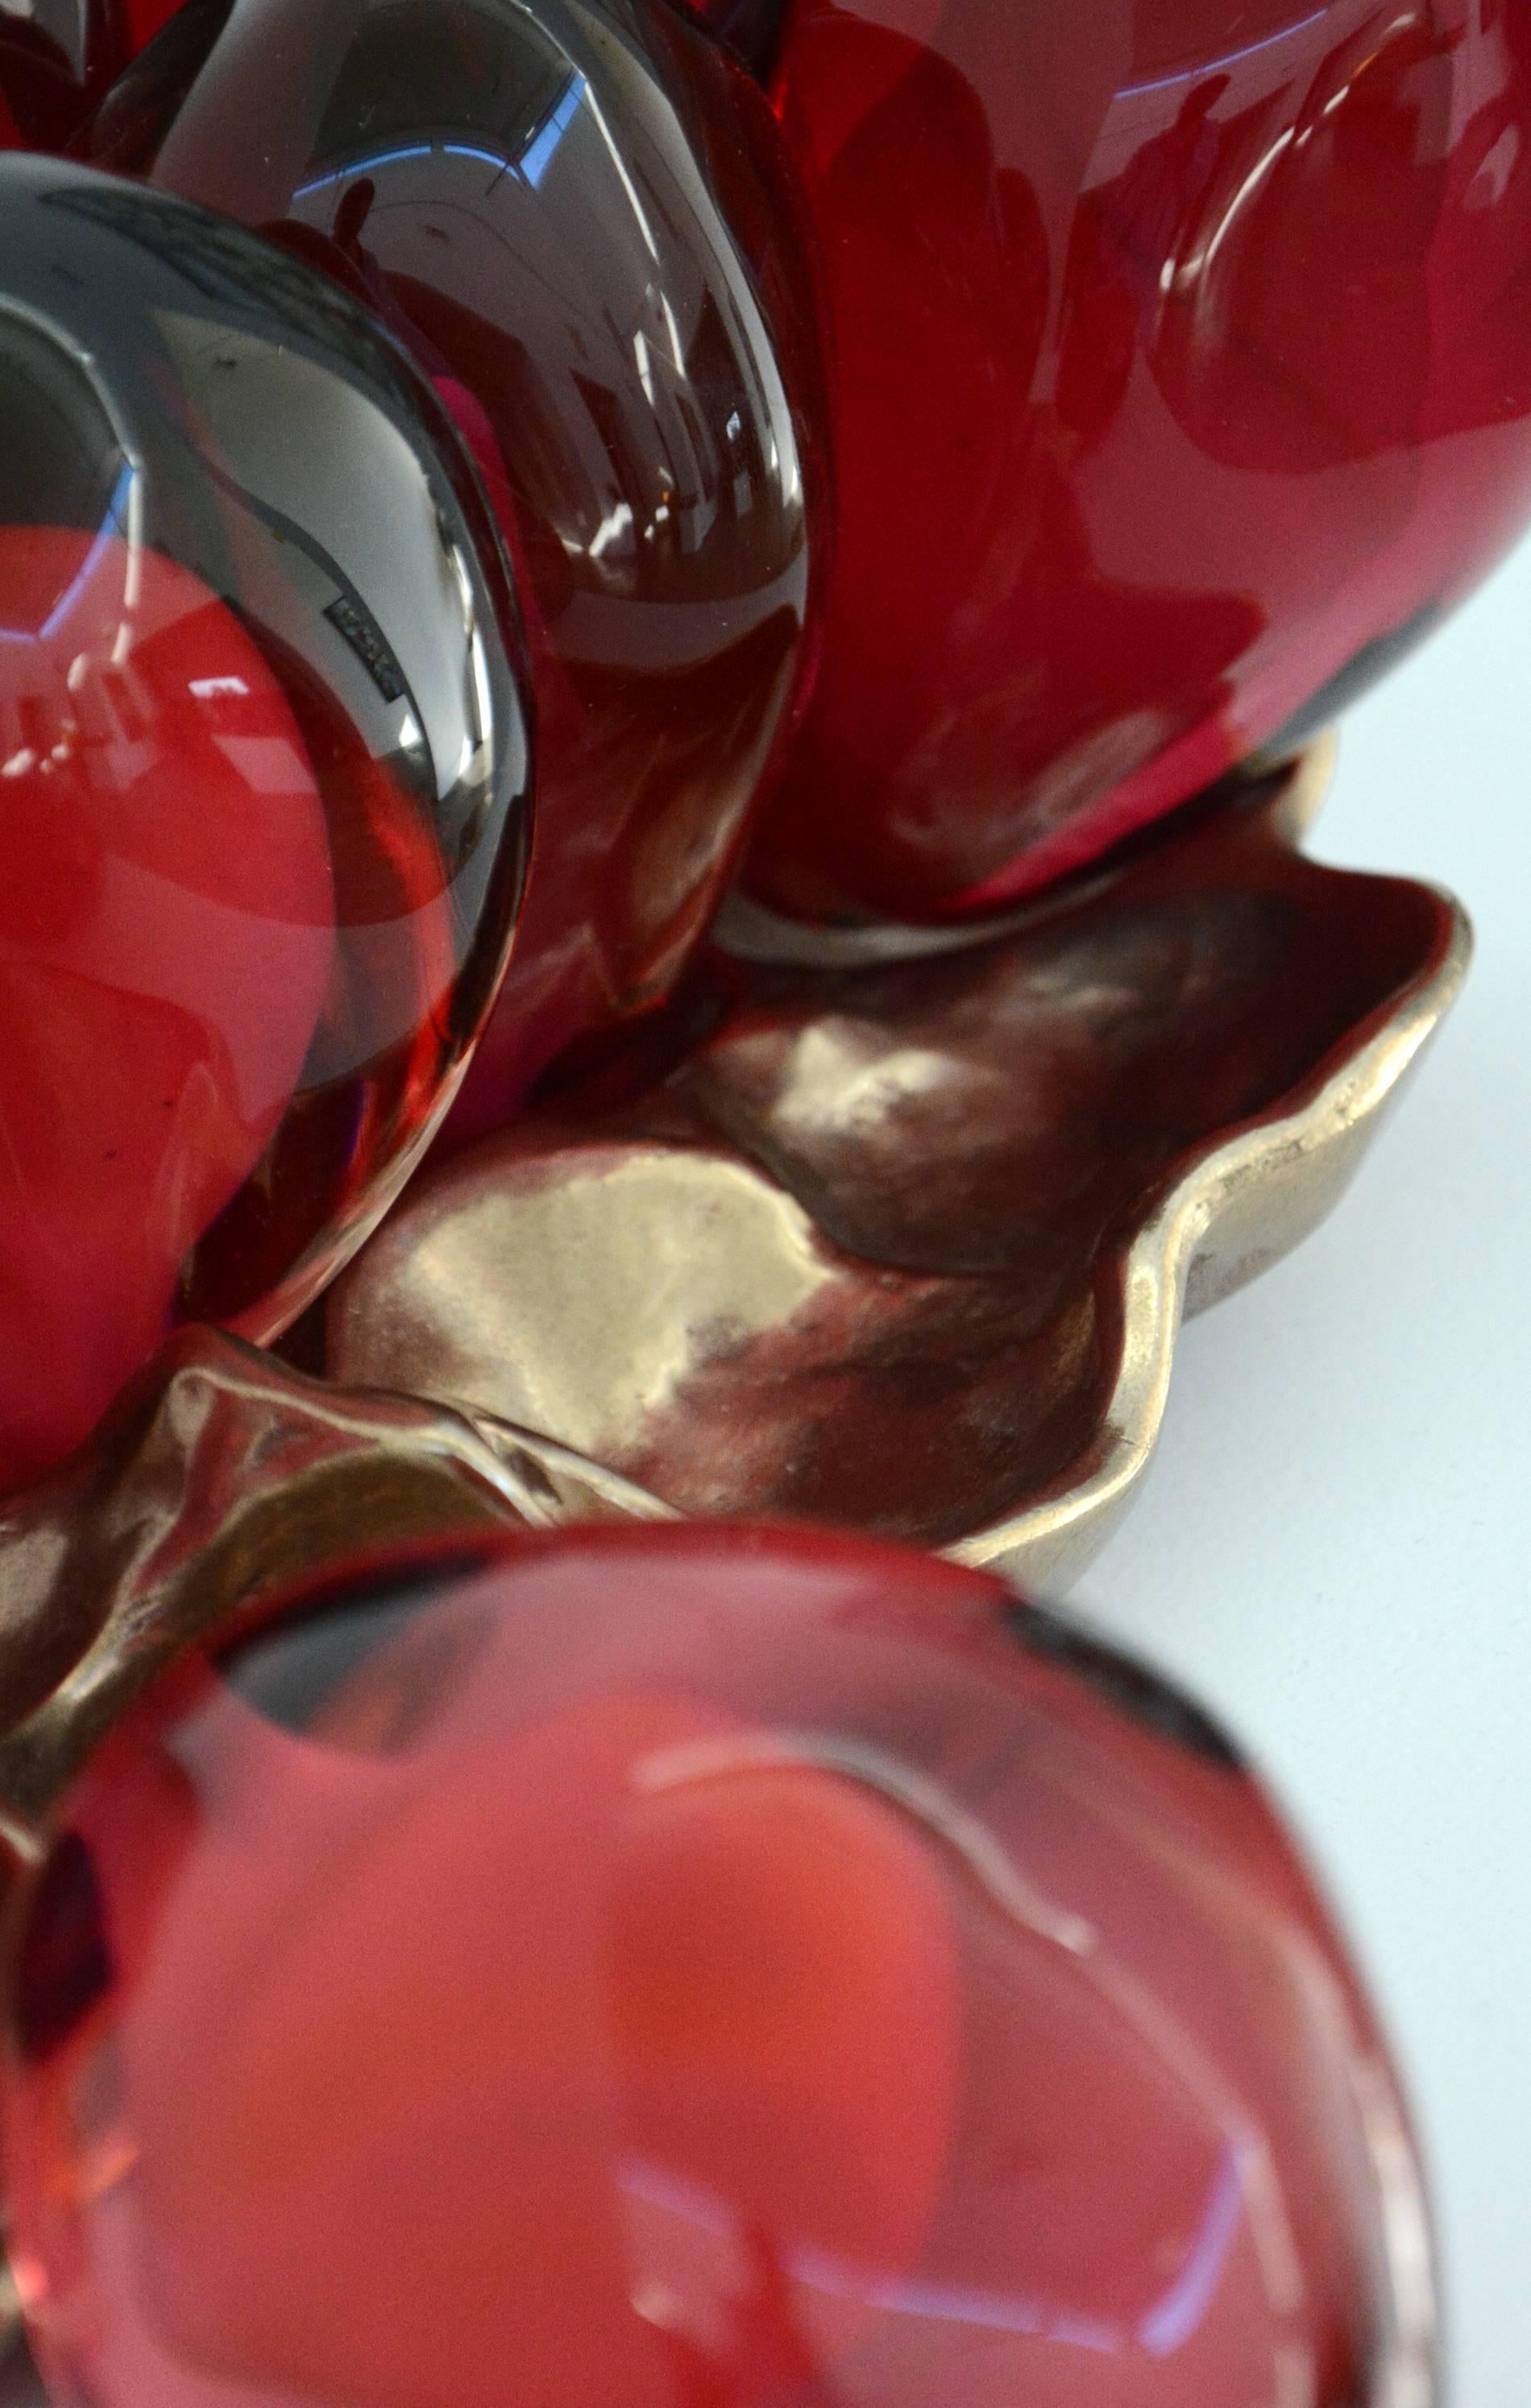 Pomegranate Seeds Nestled on Bronze I - bright, red, glass, still life sculpture - Sculpture by Catherine Vamvakas Lay